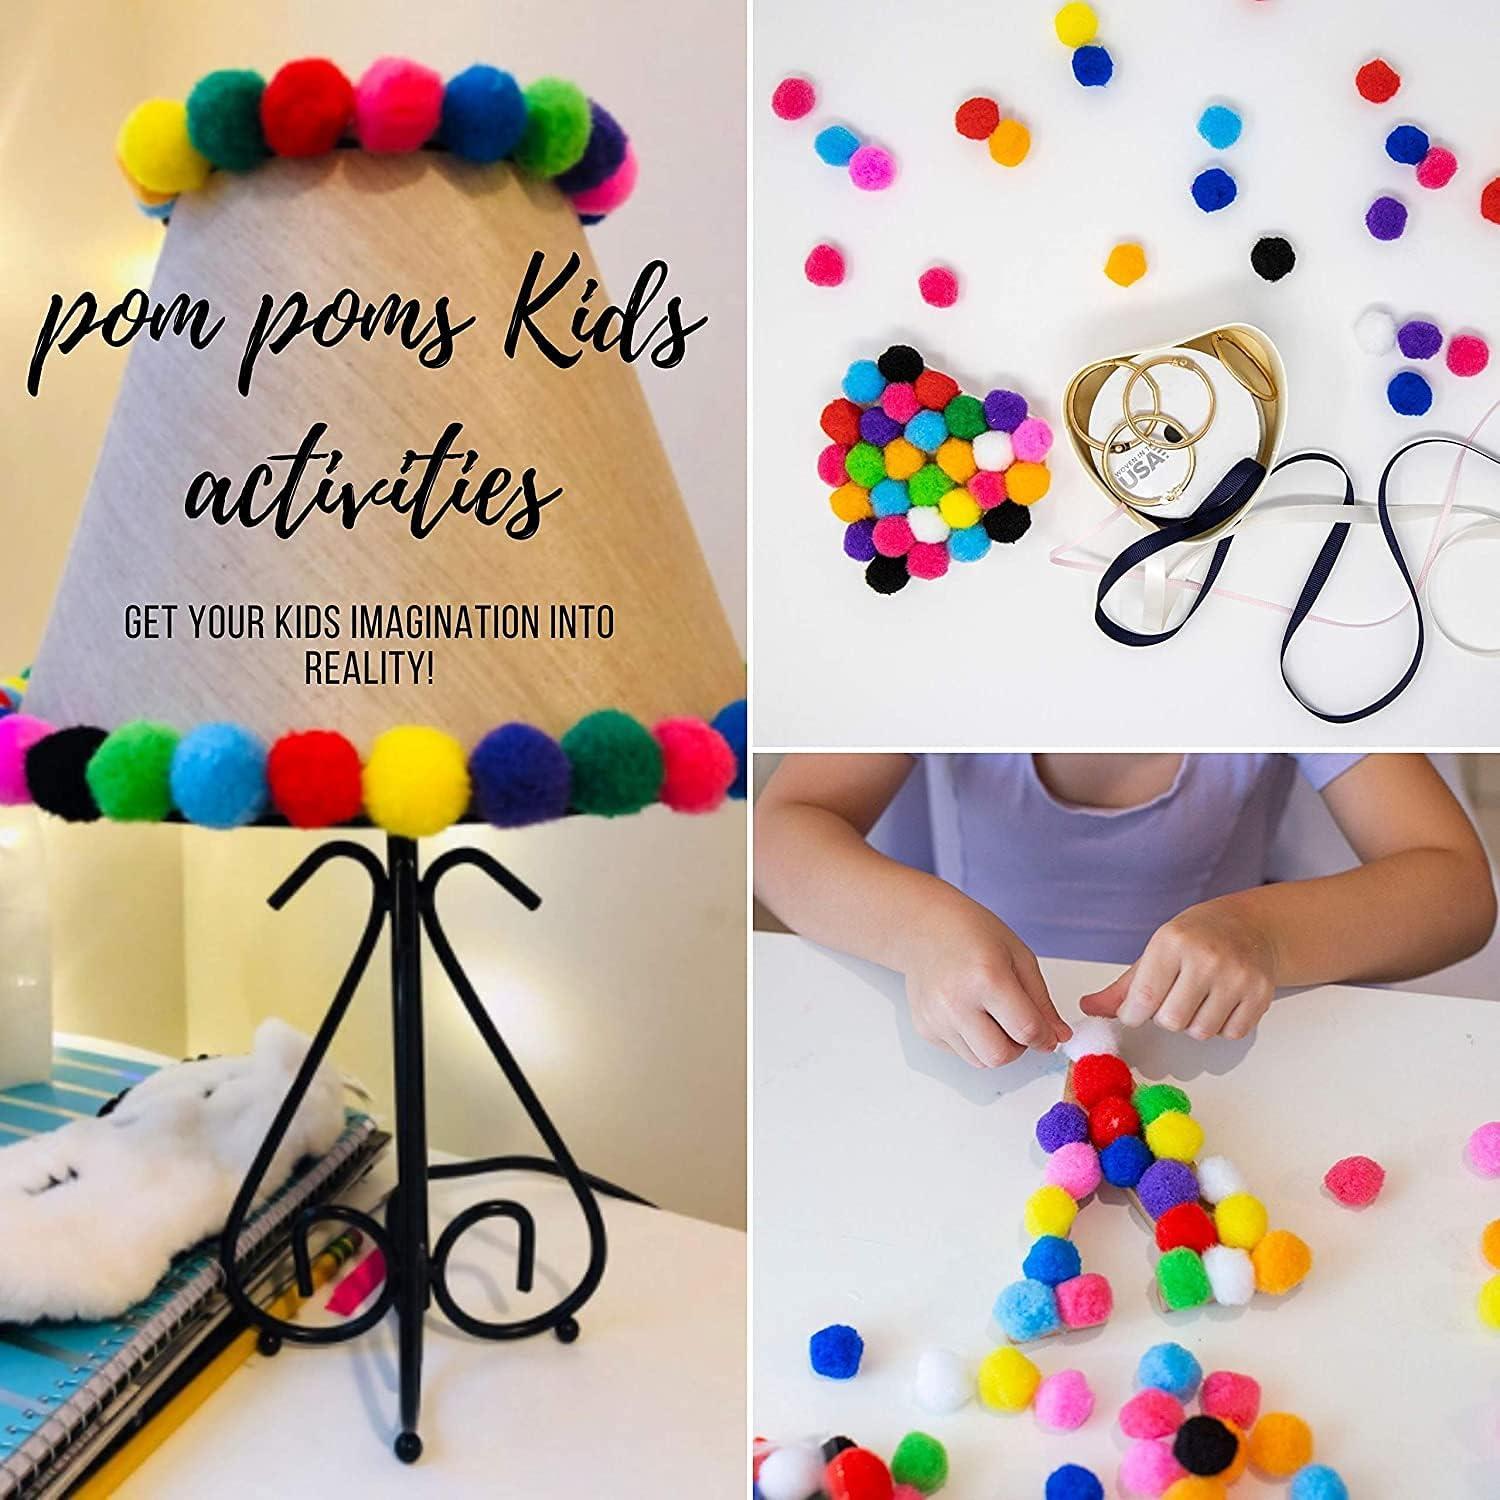 WAU Crafts - 400 Pcs - 1 inch 300 Multicolored Large Pom Poms Arts and  Crafts with 100 Googly Eyes - Pompoms for Crafts & DIY Projects  Multicolor-400